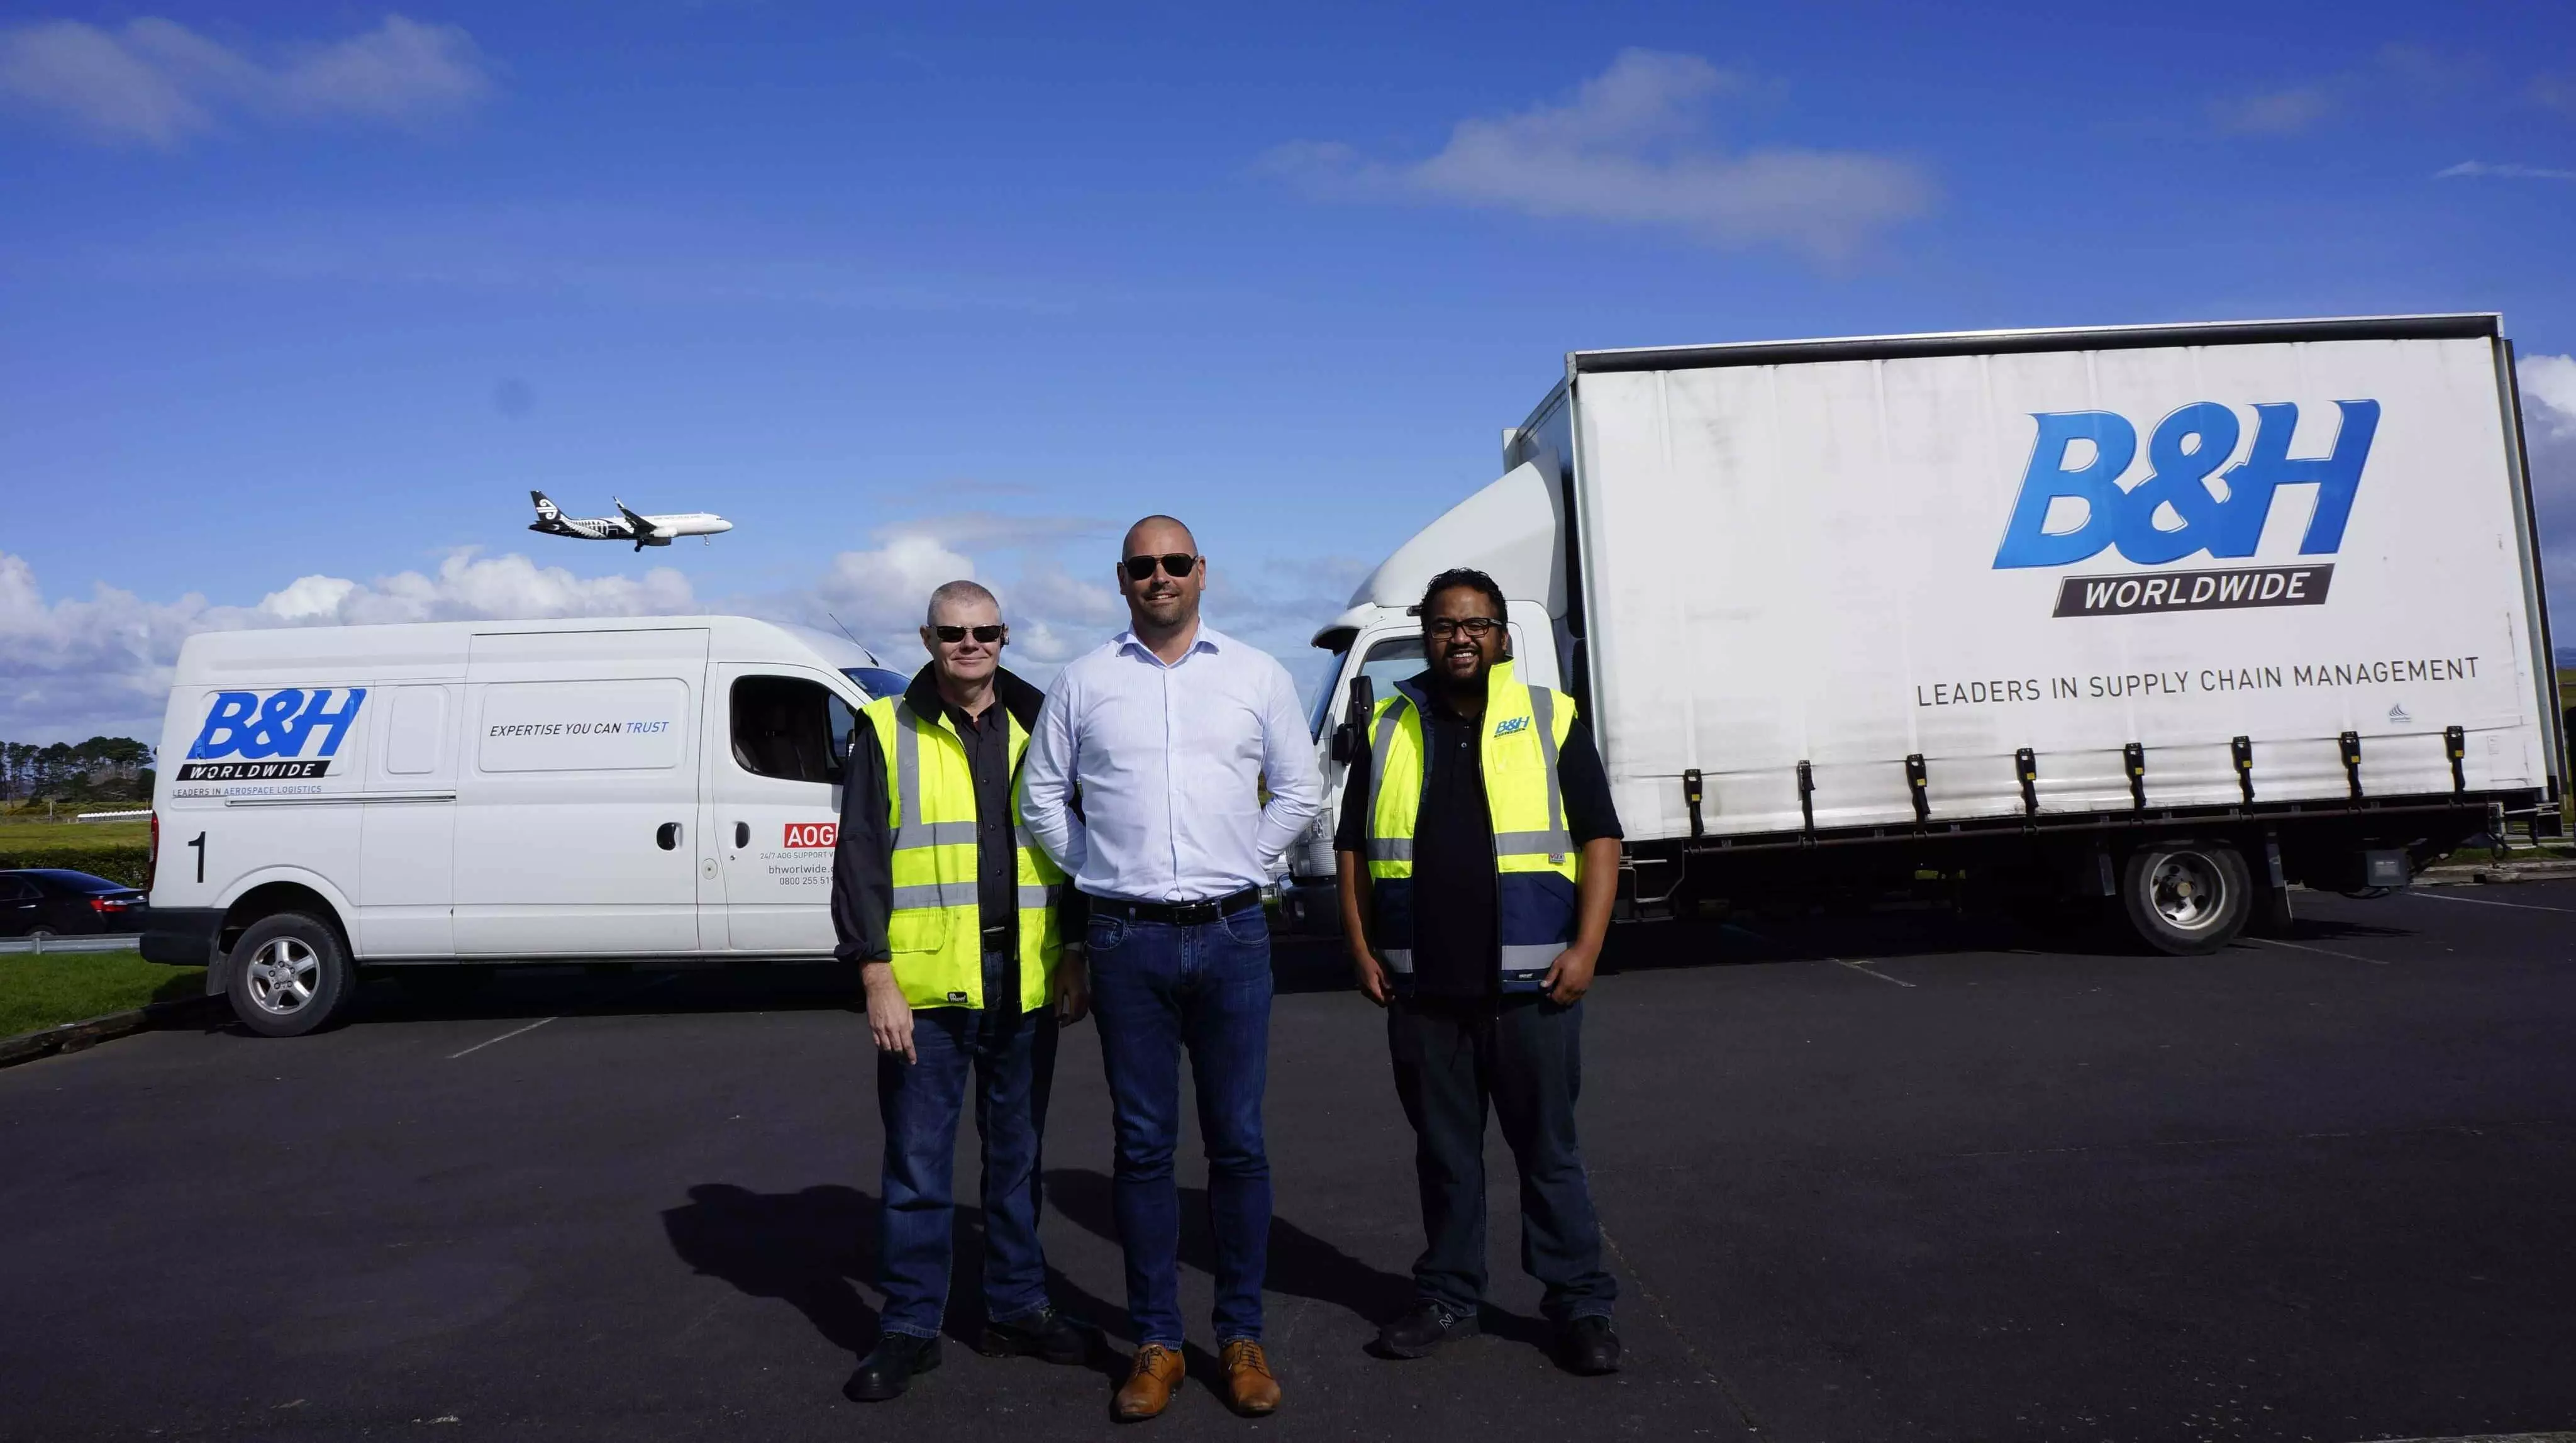 B&H Worldwide achieves airside status at Auckland, Christchurch airports